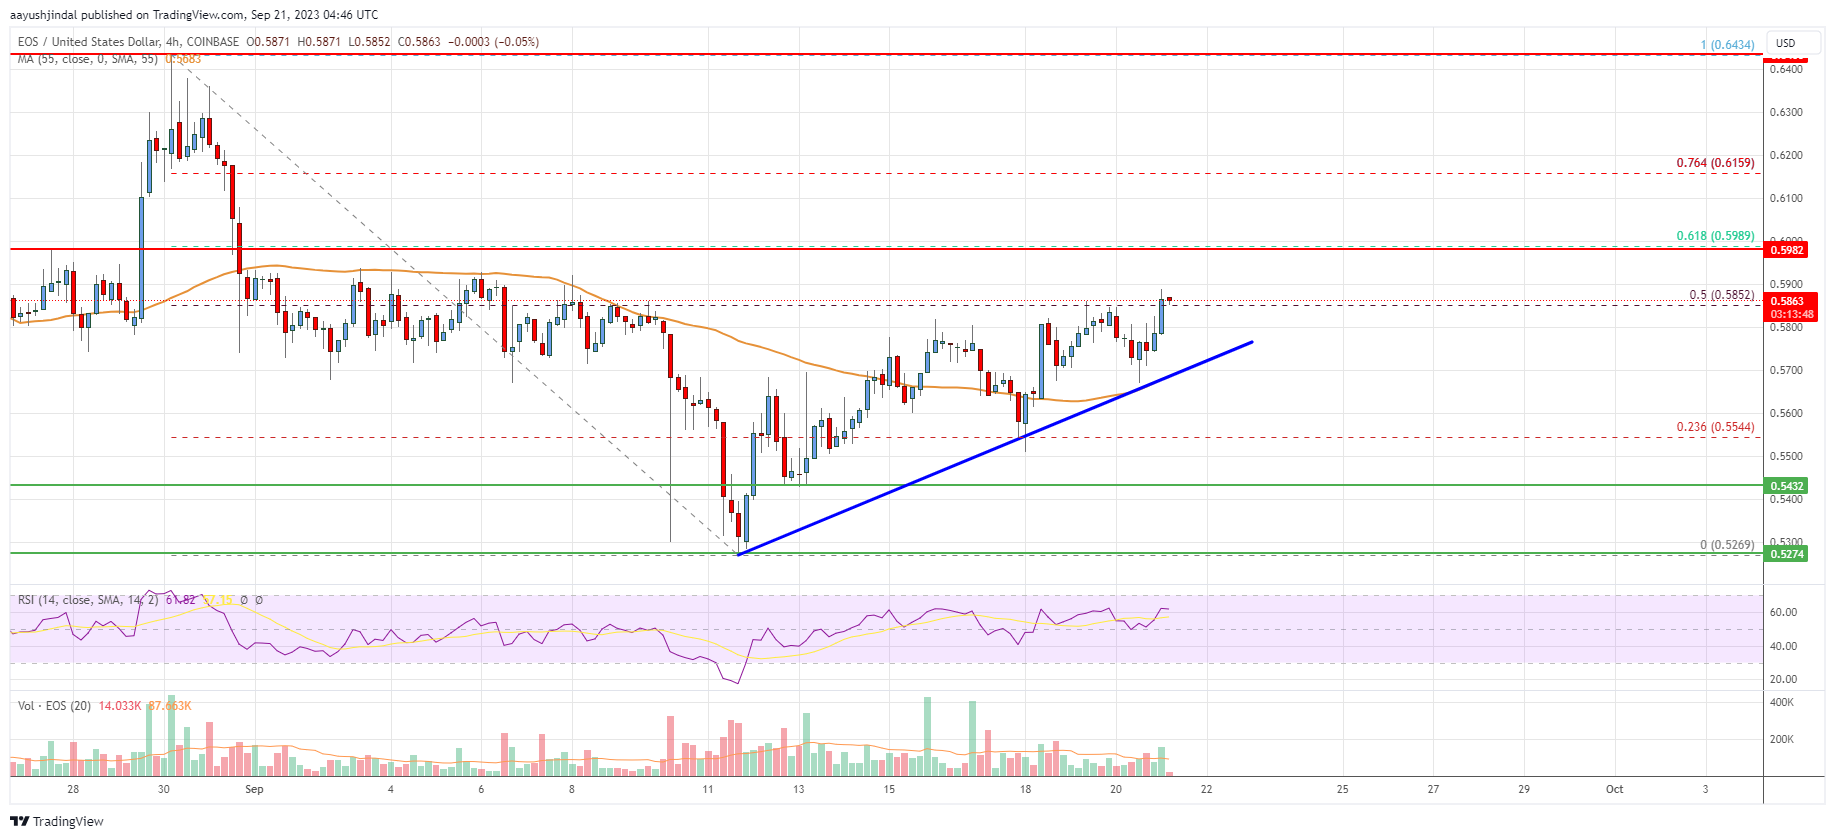 EOS Price Analysis: Technical Indicators Suggest Increase To $0.64